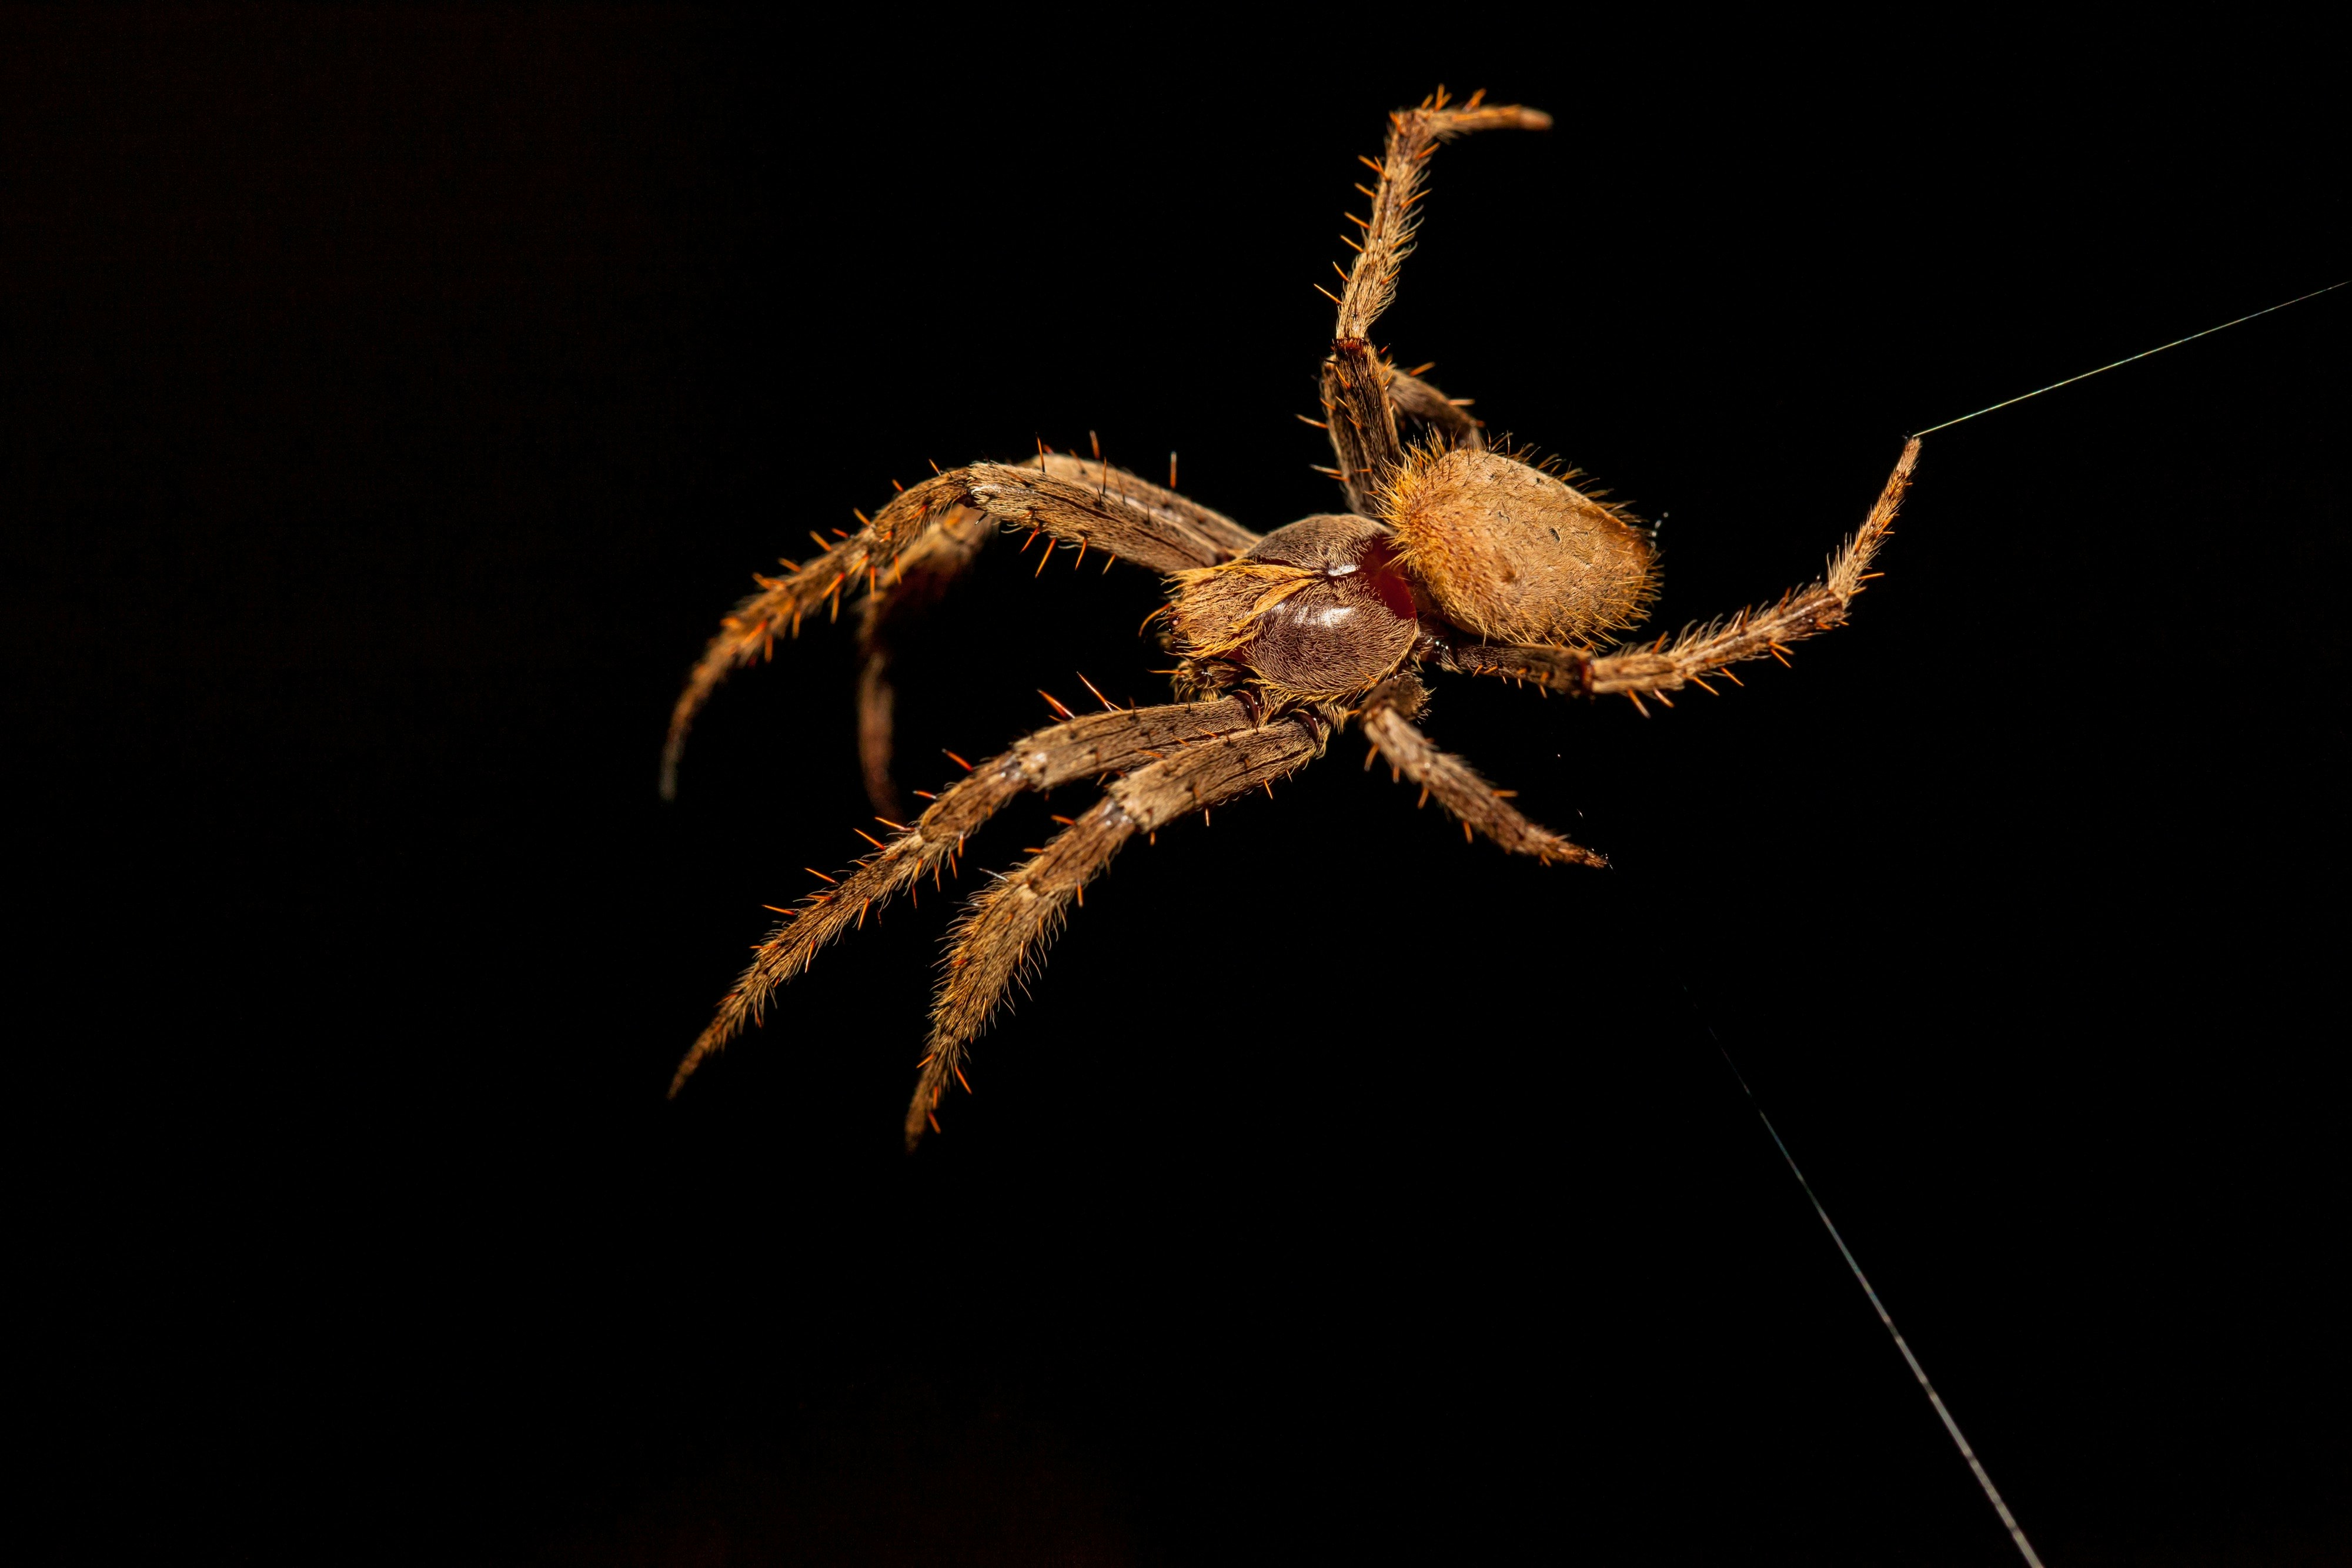 brown and black spider in black background